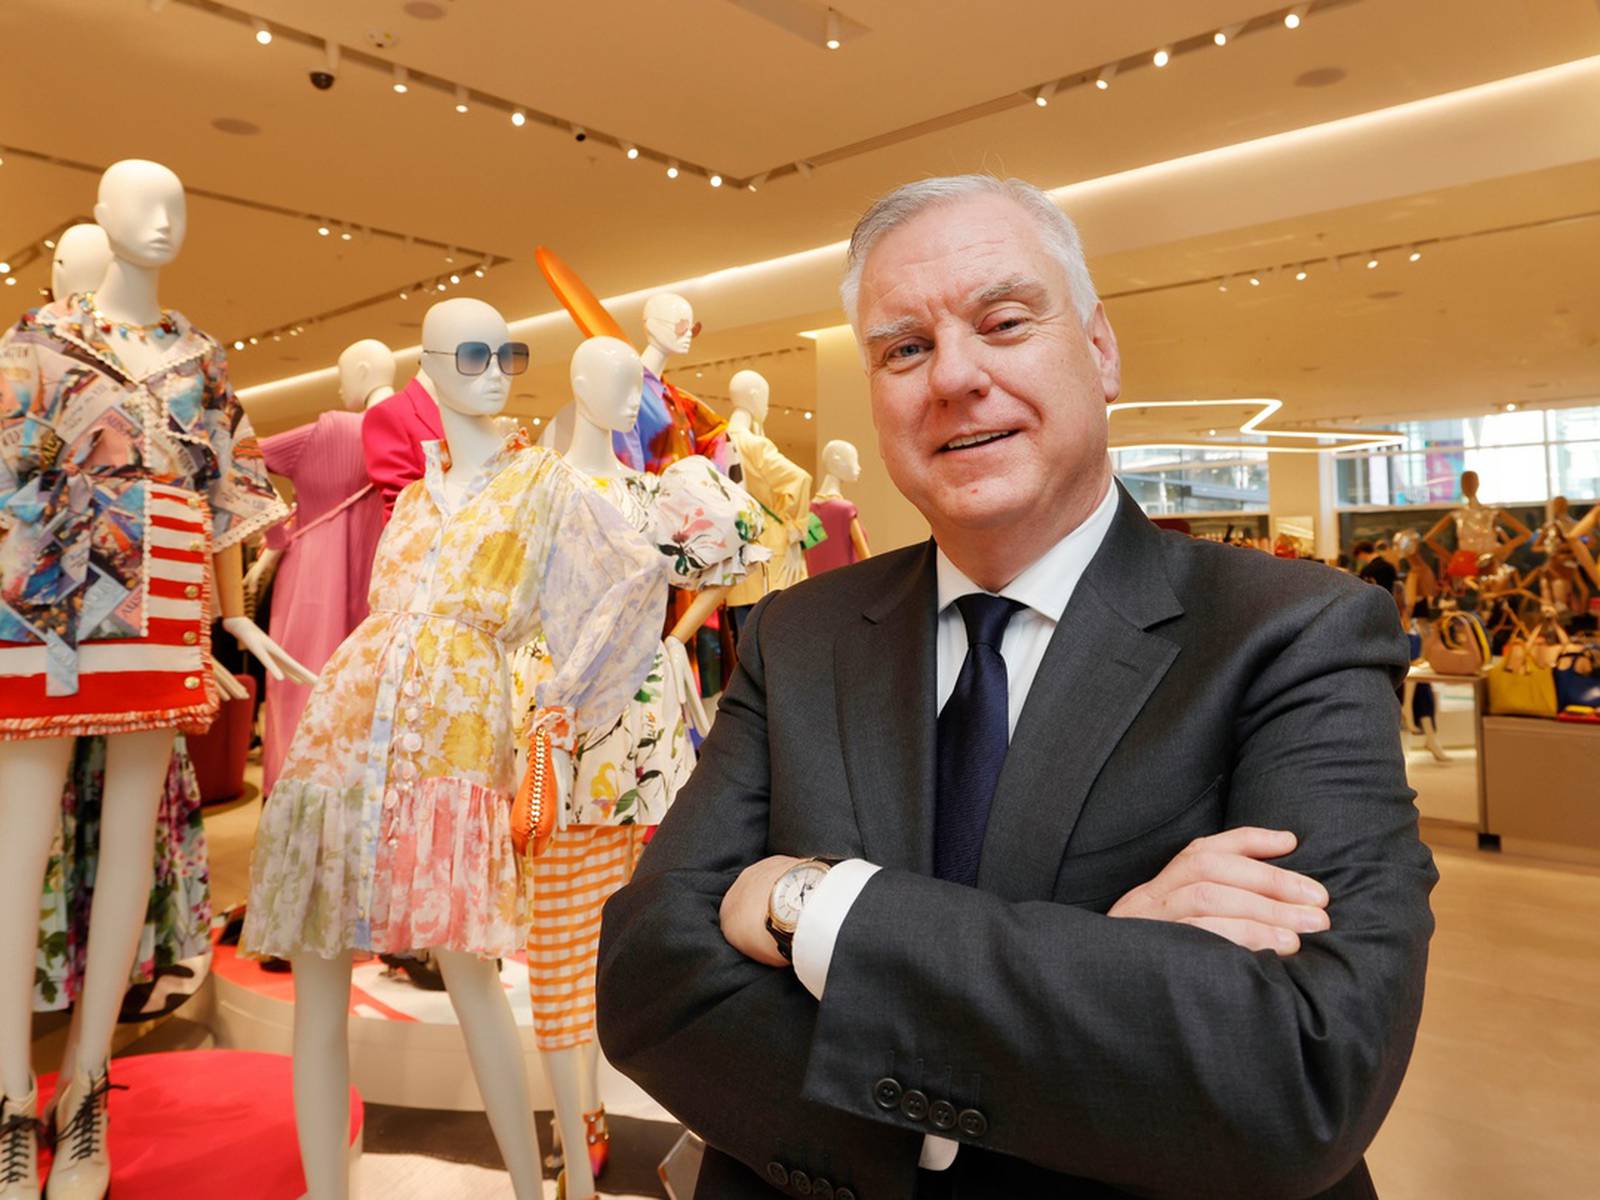 Brown Thomas faces backlash over IV drip station in new Dundrum